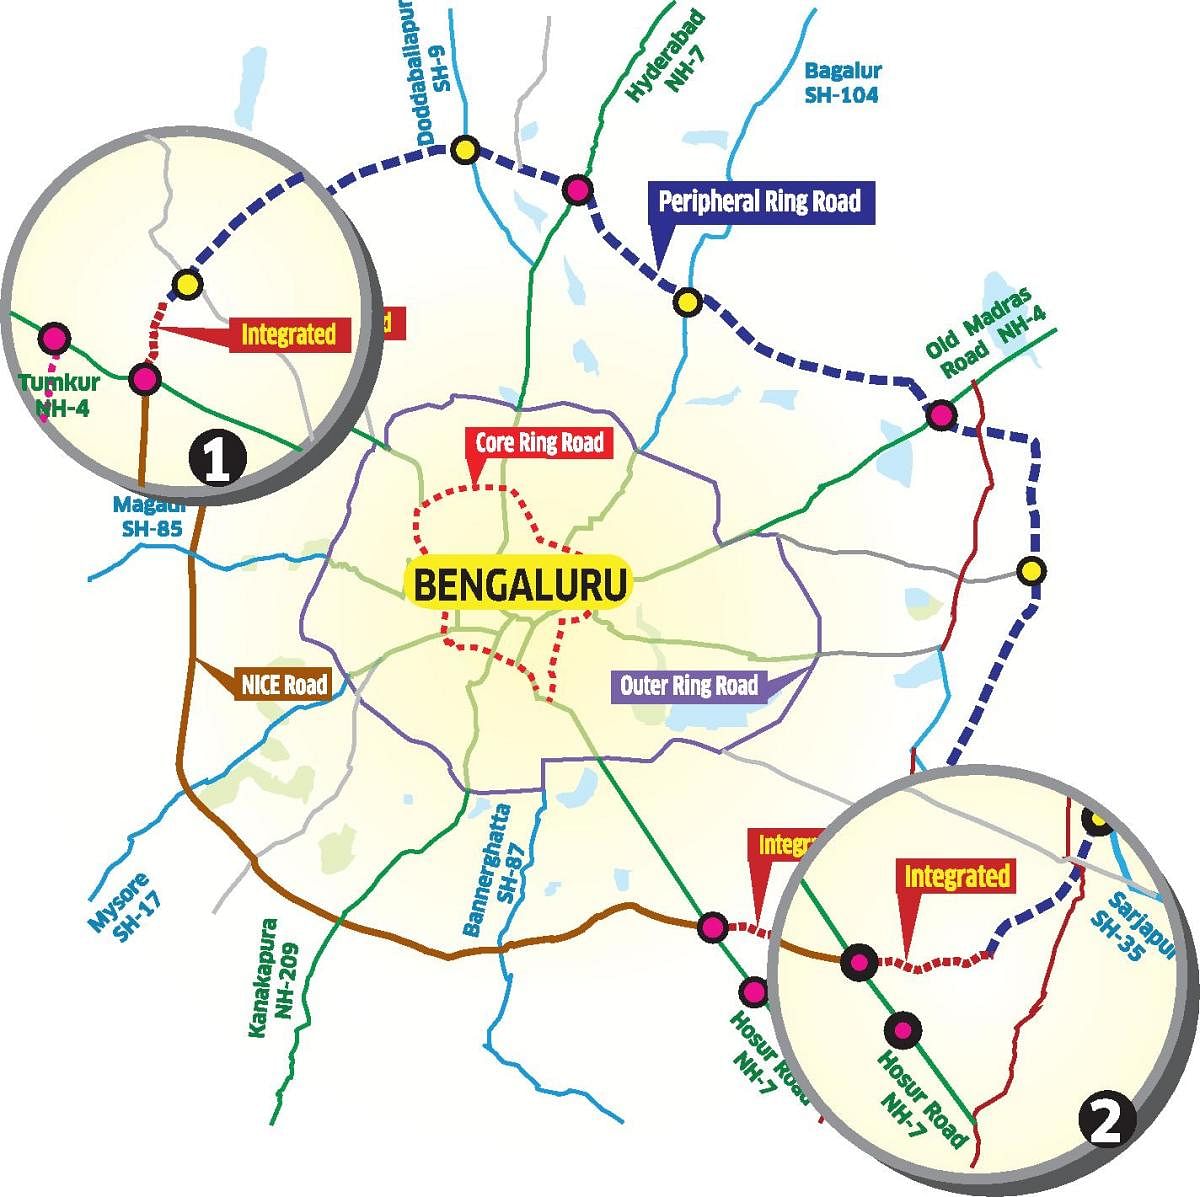 How to get to Mallathahalli Road in Bengaluru by Bus or Metro?